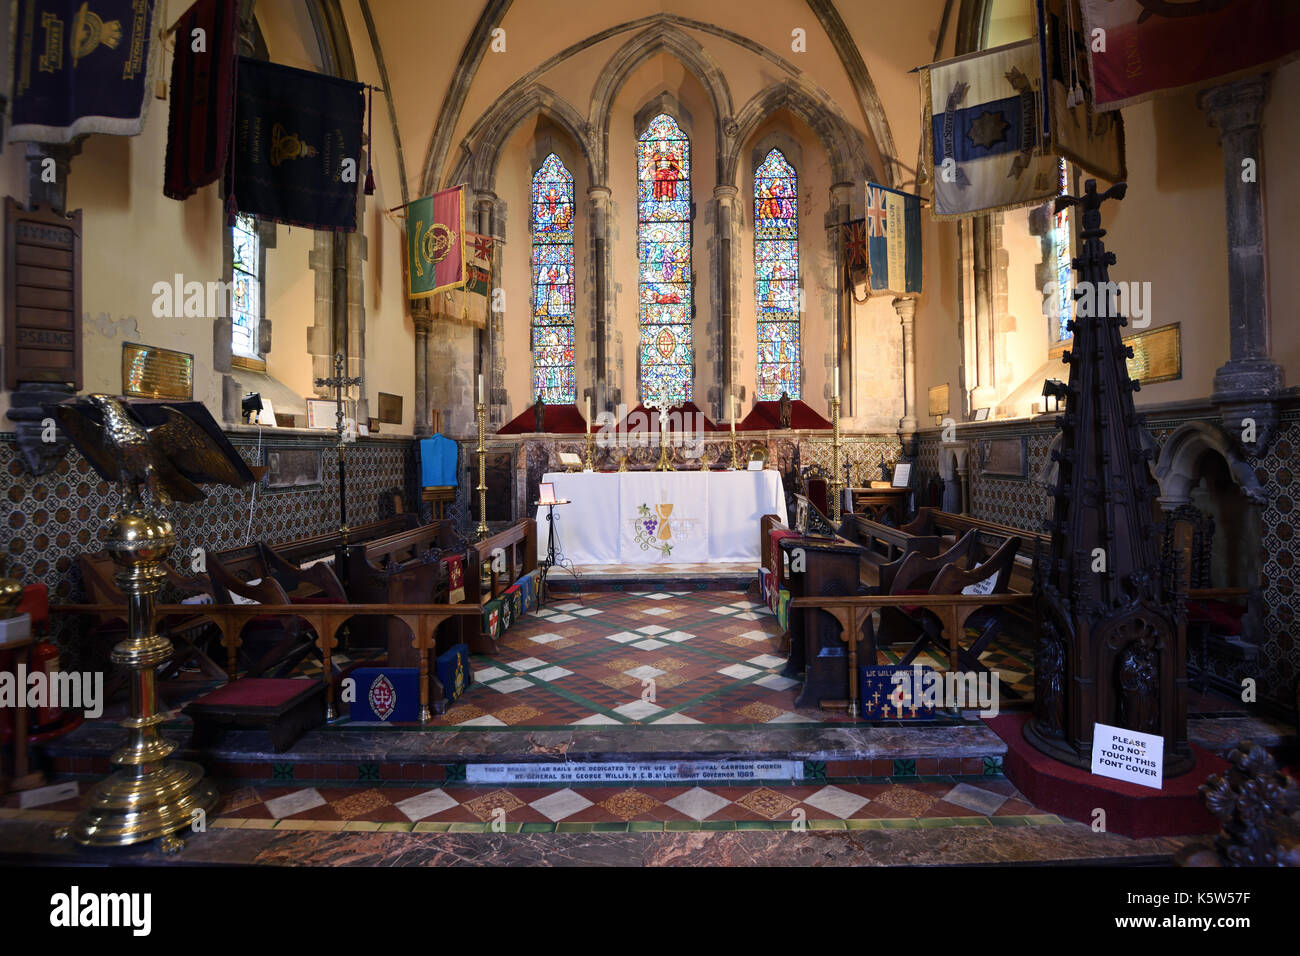 The Victorian interior of the chancel of The Royal Garrison Church. Portsmouth, Hampshire, UK. Stock Photo